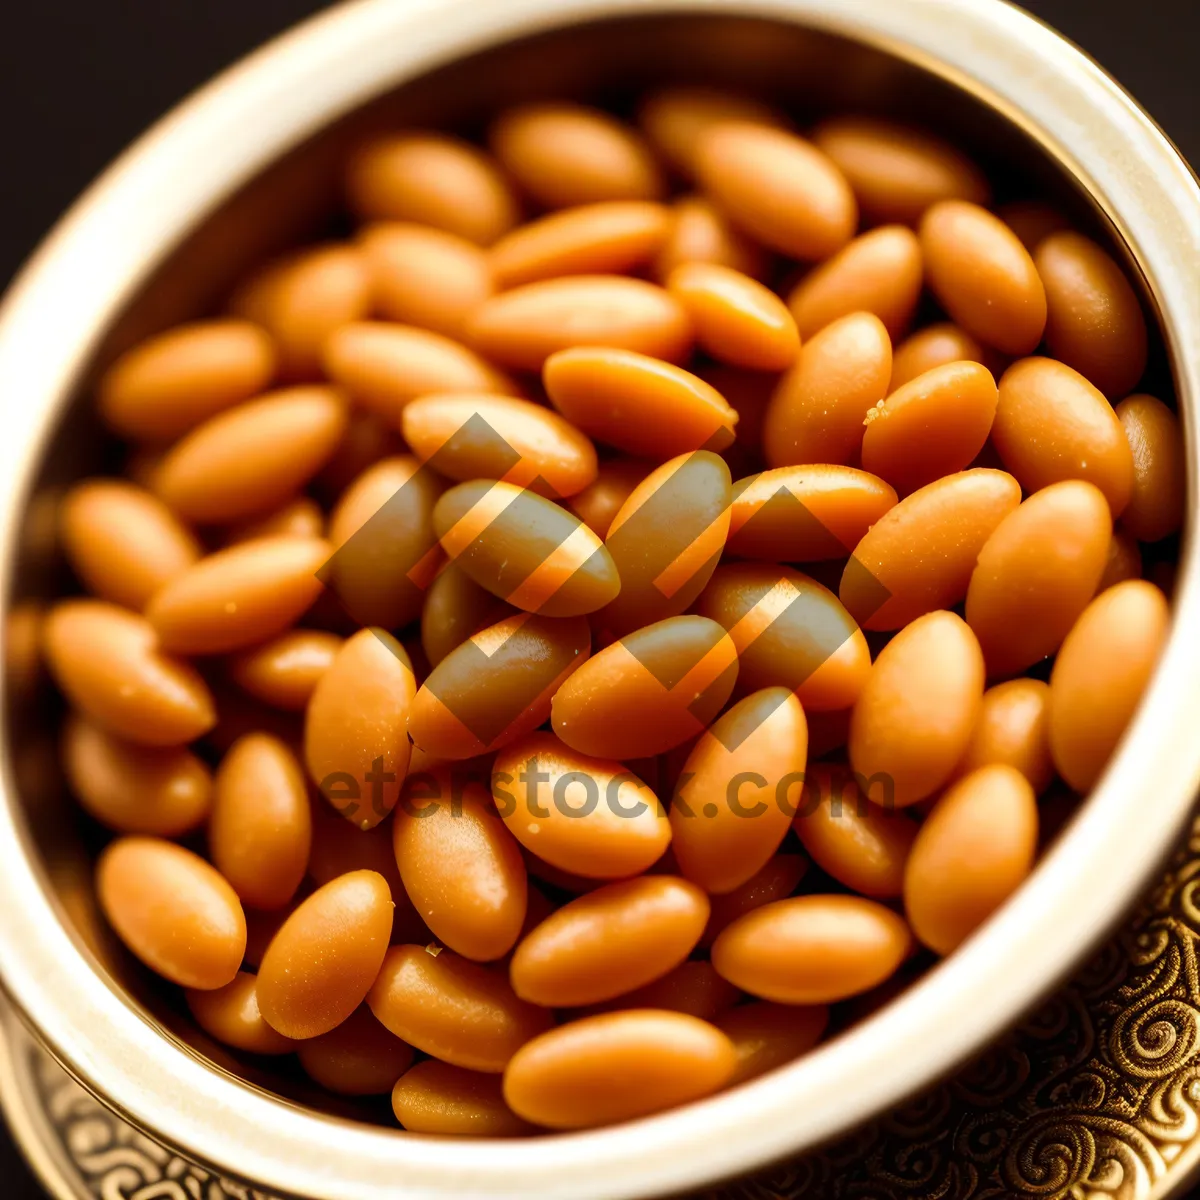 Picture of Nutritious assortment of wholesome legumes and beans.